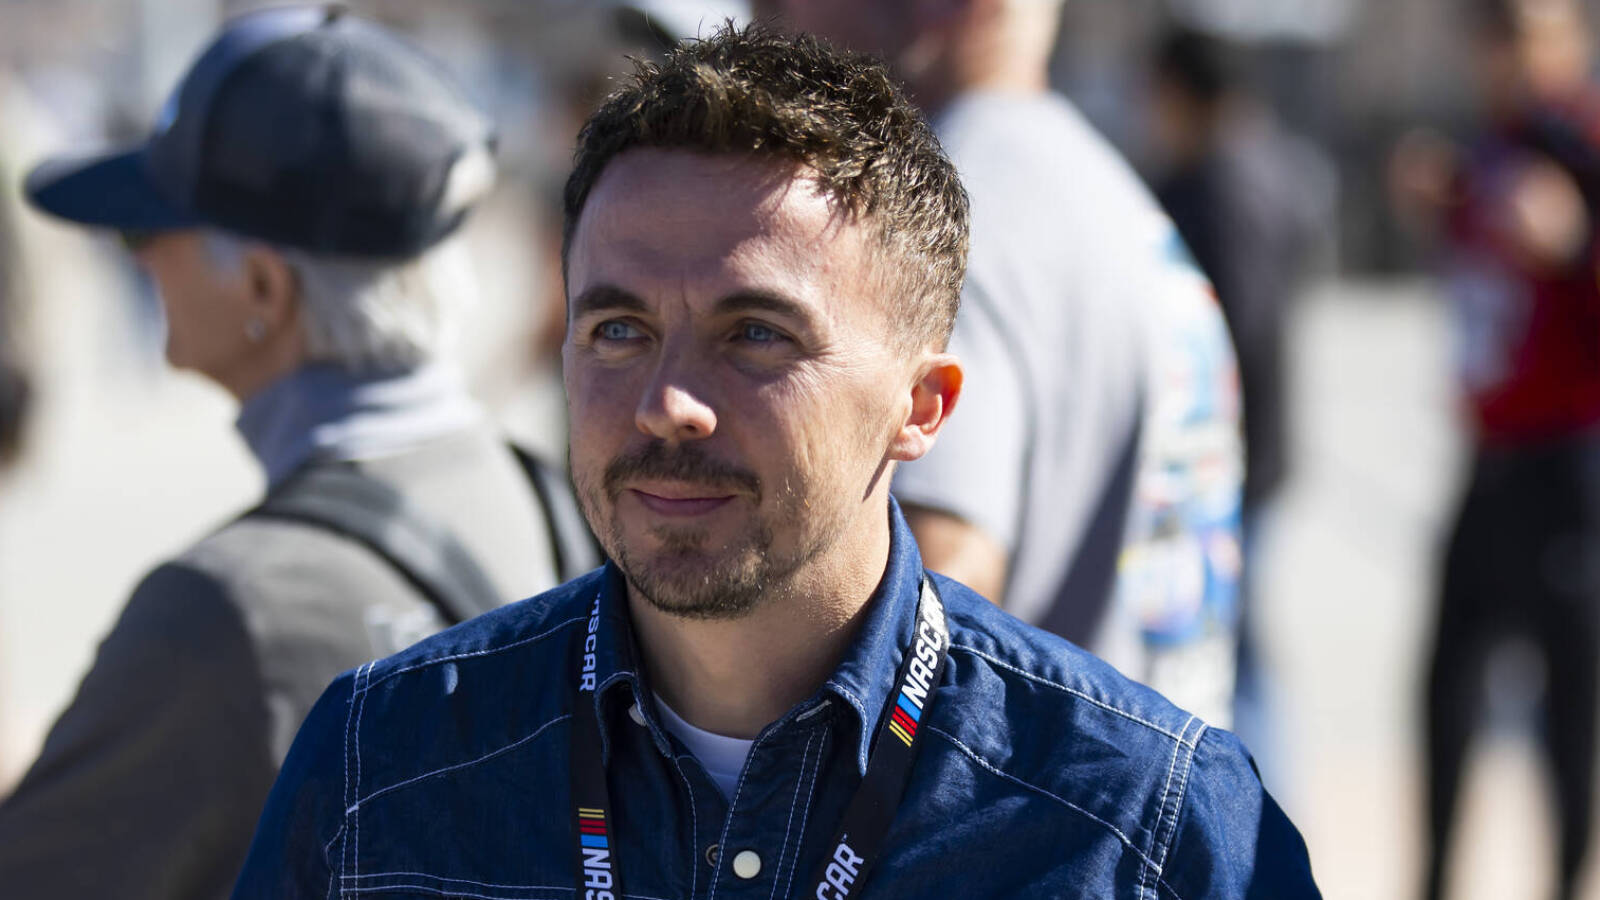 Malcolm in the driver's seat: Frankie Muniz joins ARCA Racing